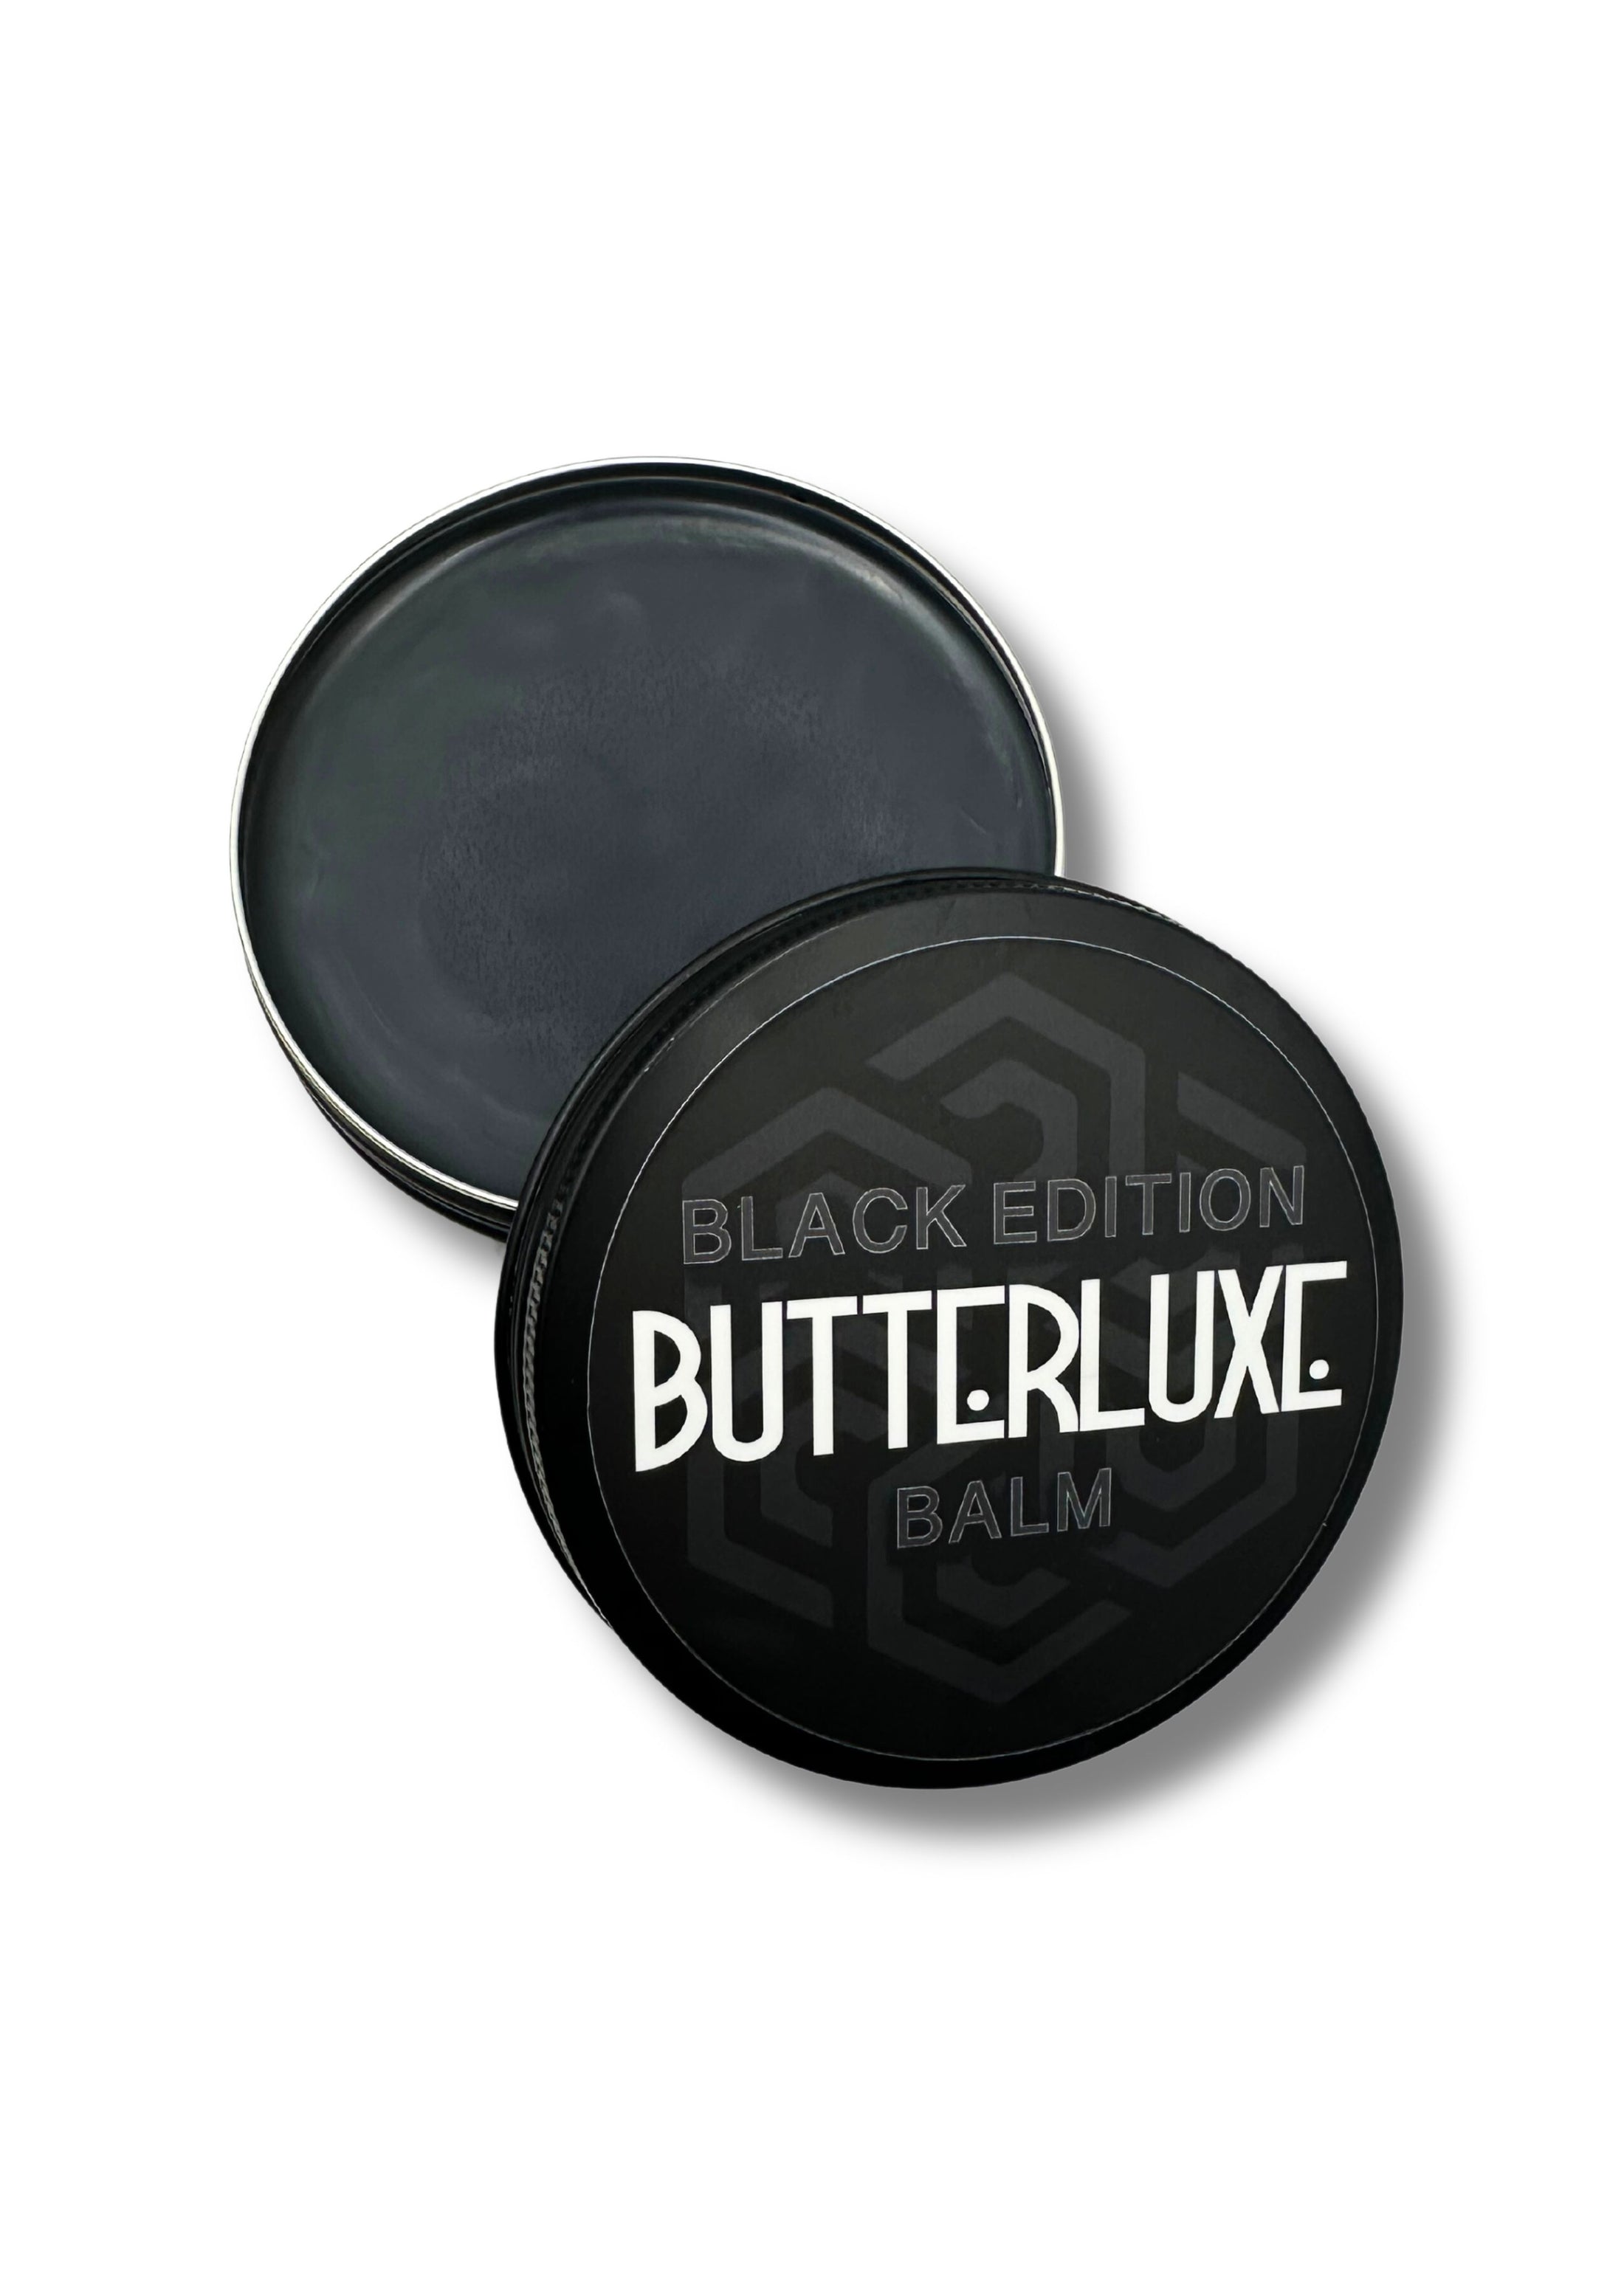 BUTTERLUXE LIMITED – Butterluxe Limited